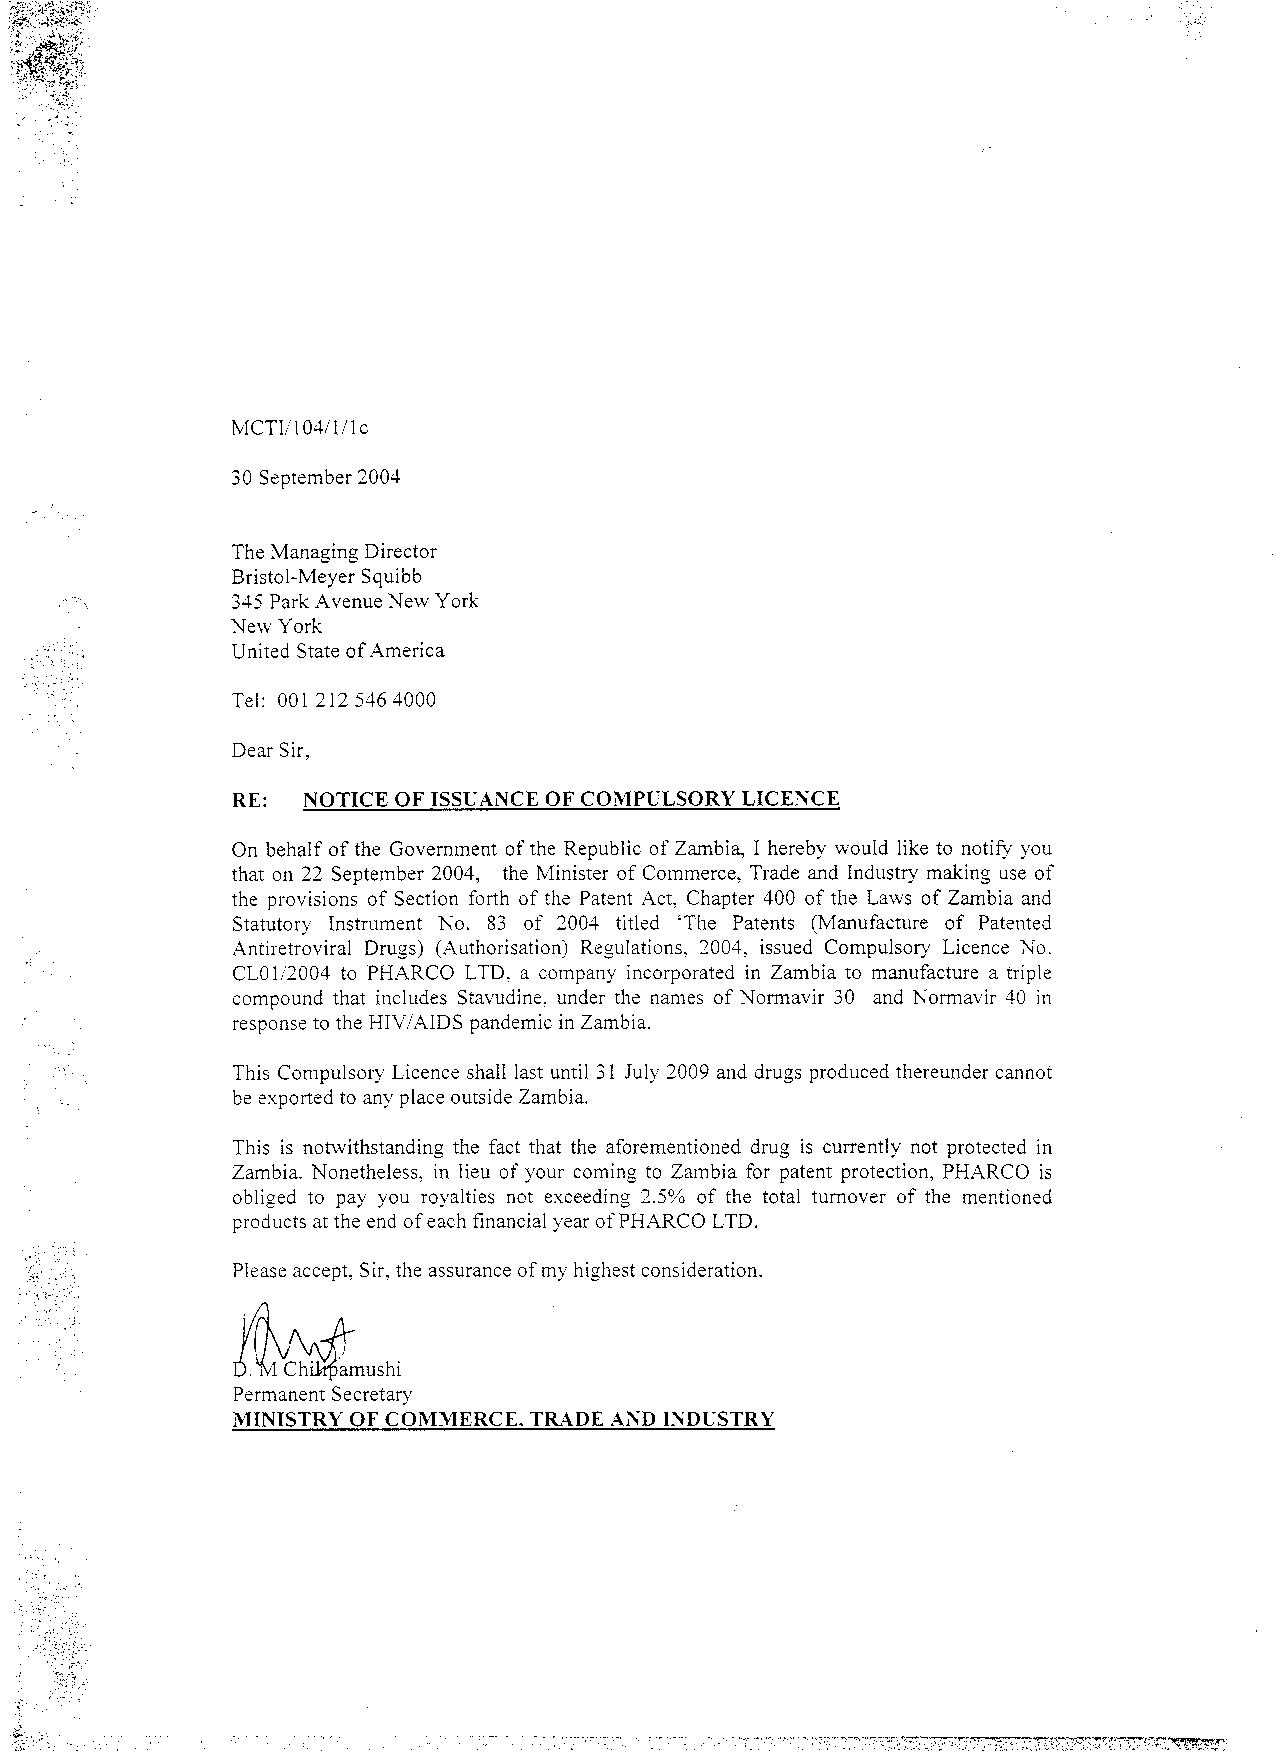 Letter from Zambian Minister of Commerce, Trade and Industry to Bristol-Myers Squibb